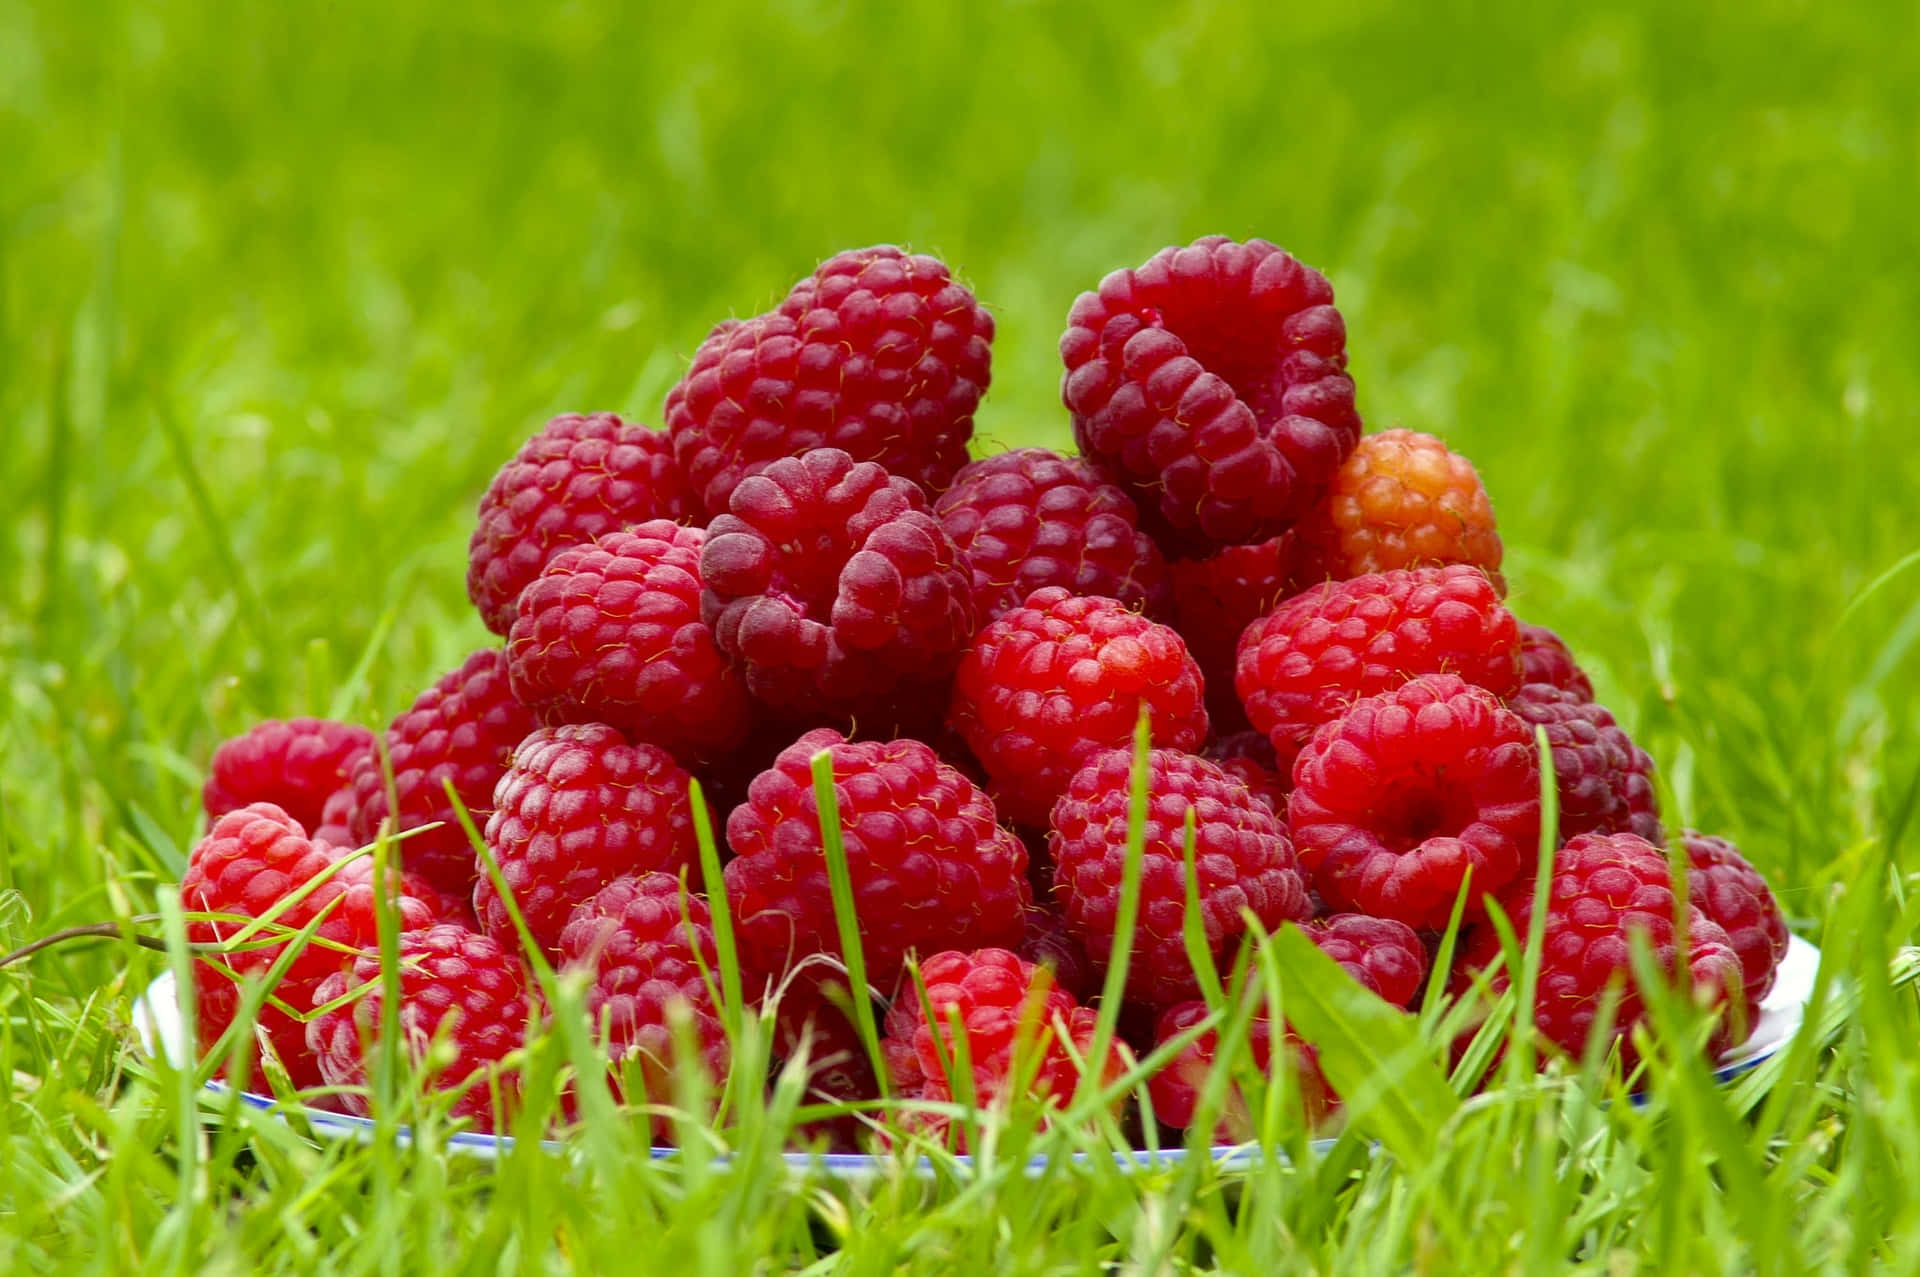 Delicious and nutritious raspberries